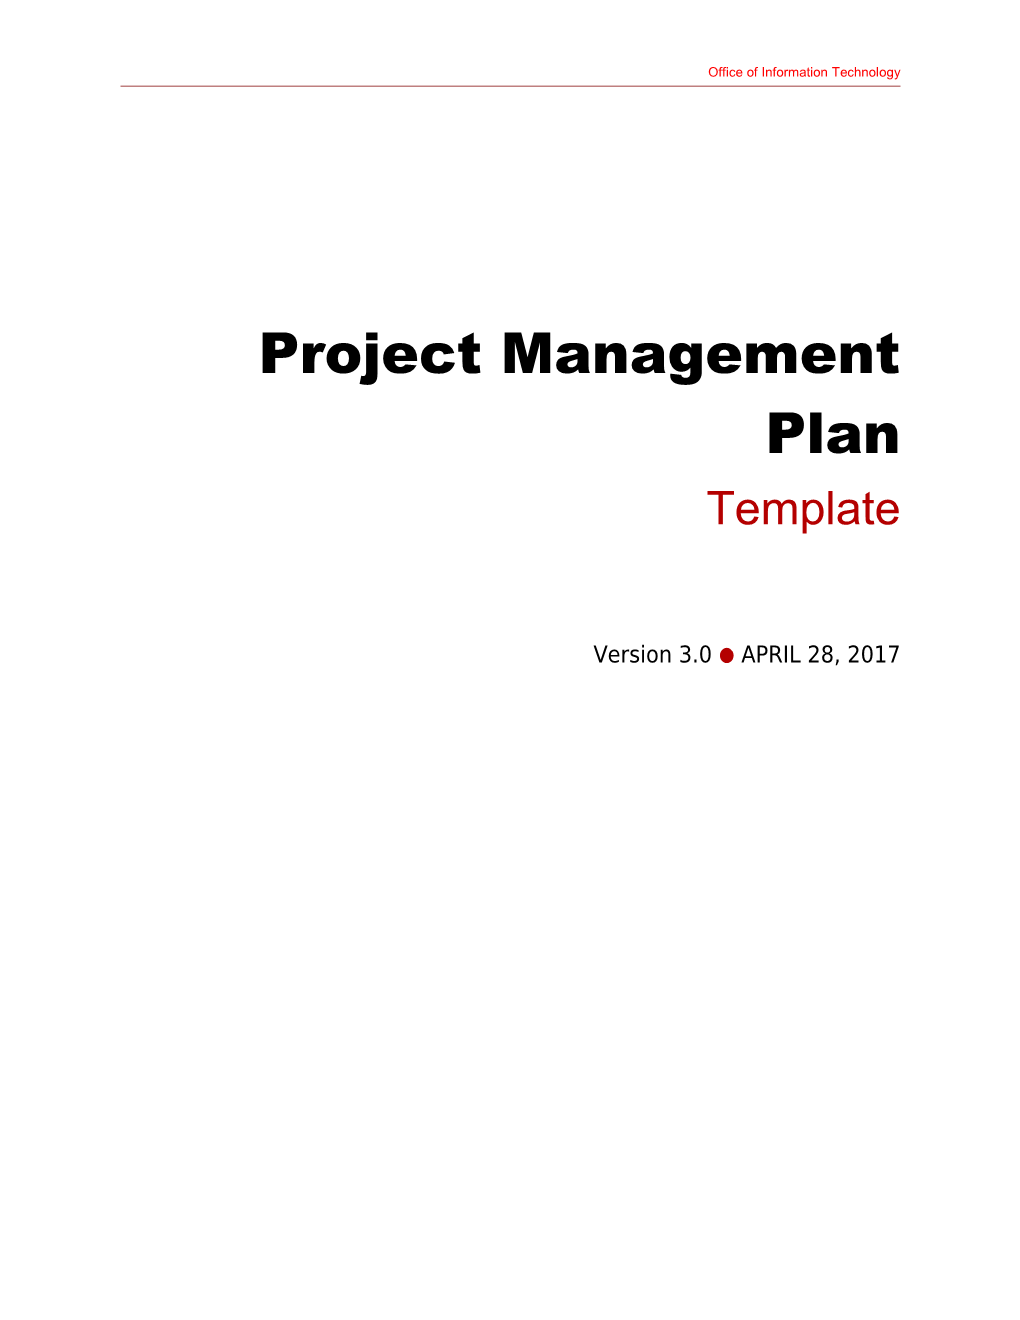 PMO Project Management Plan